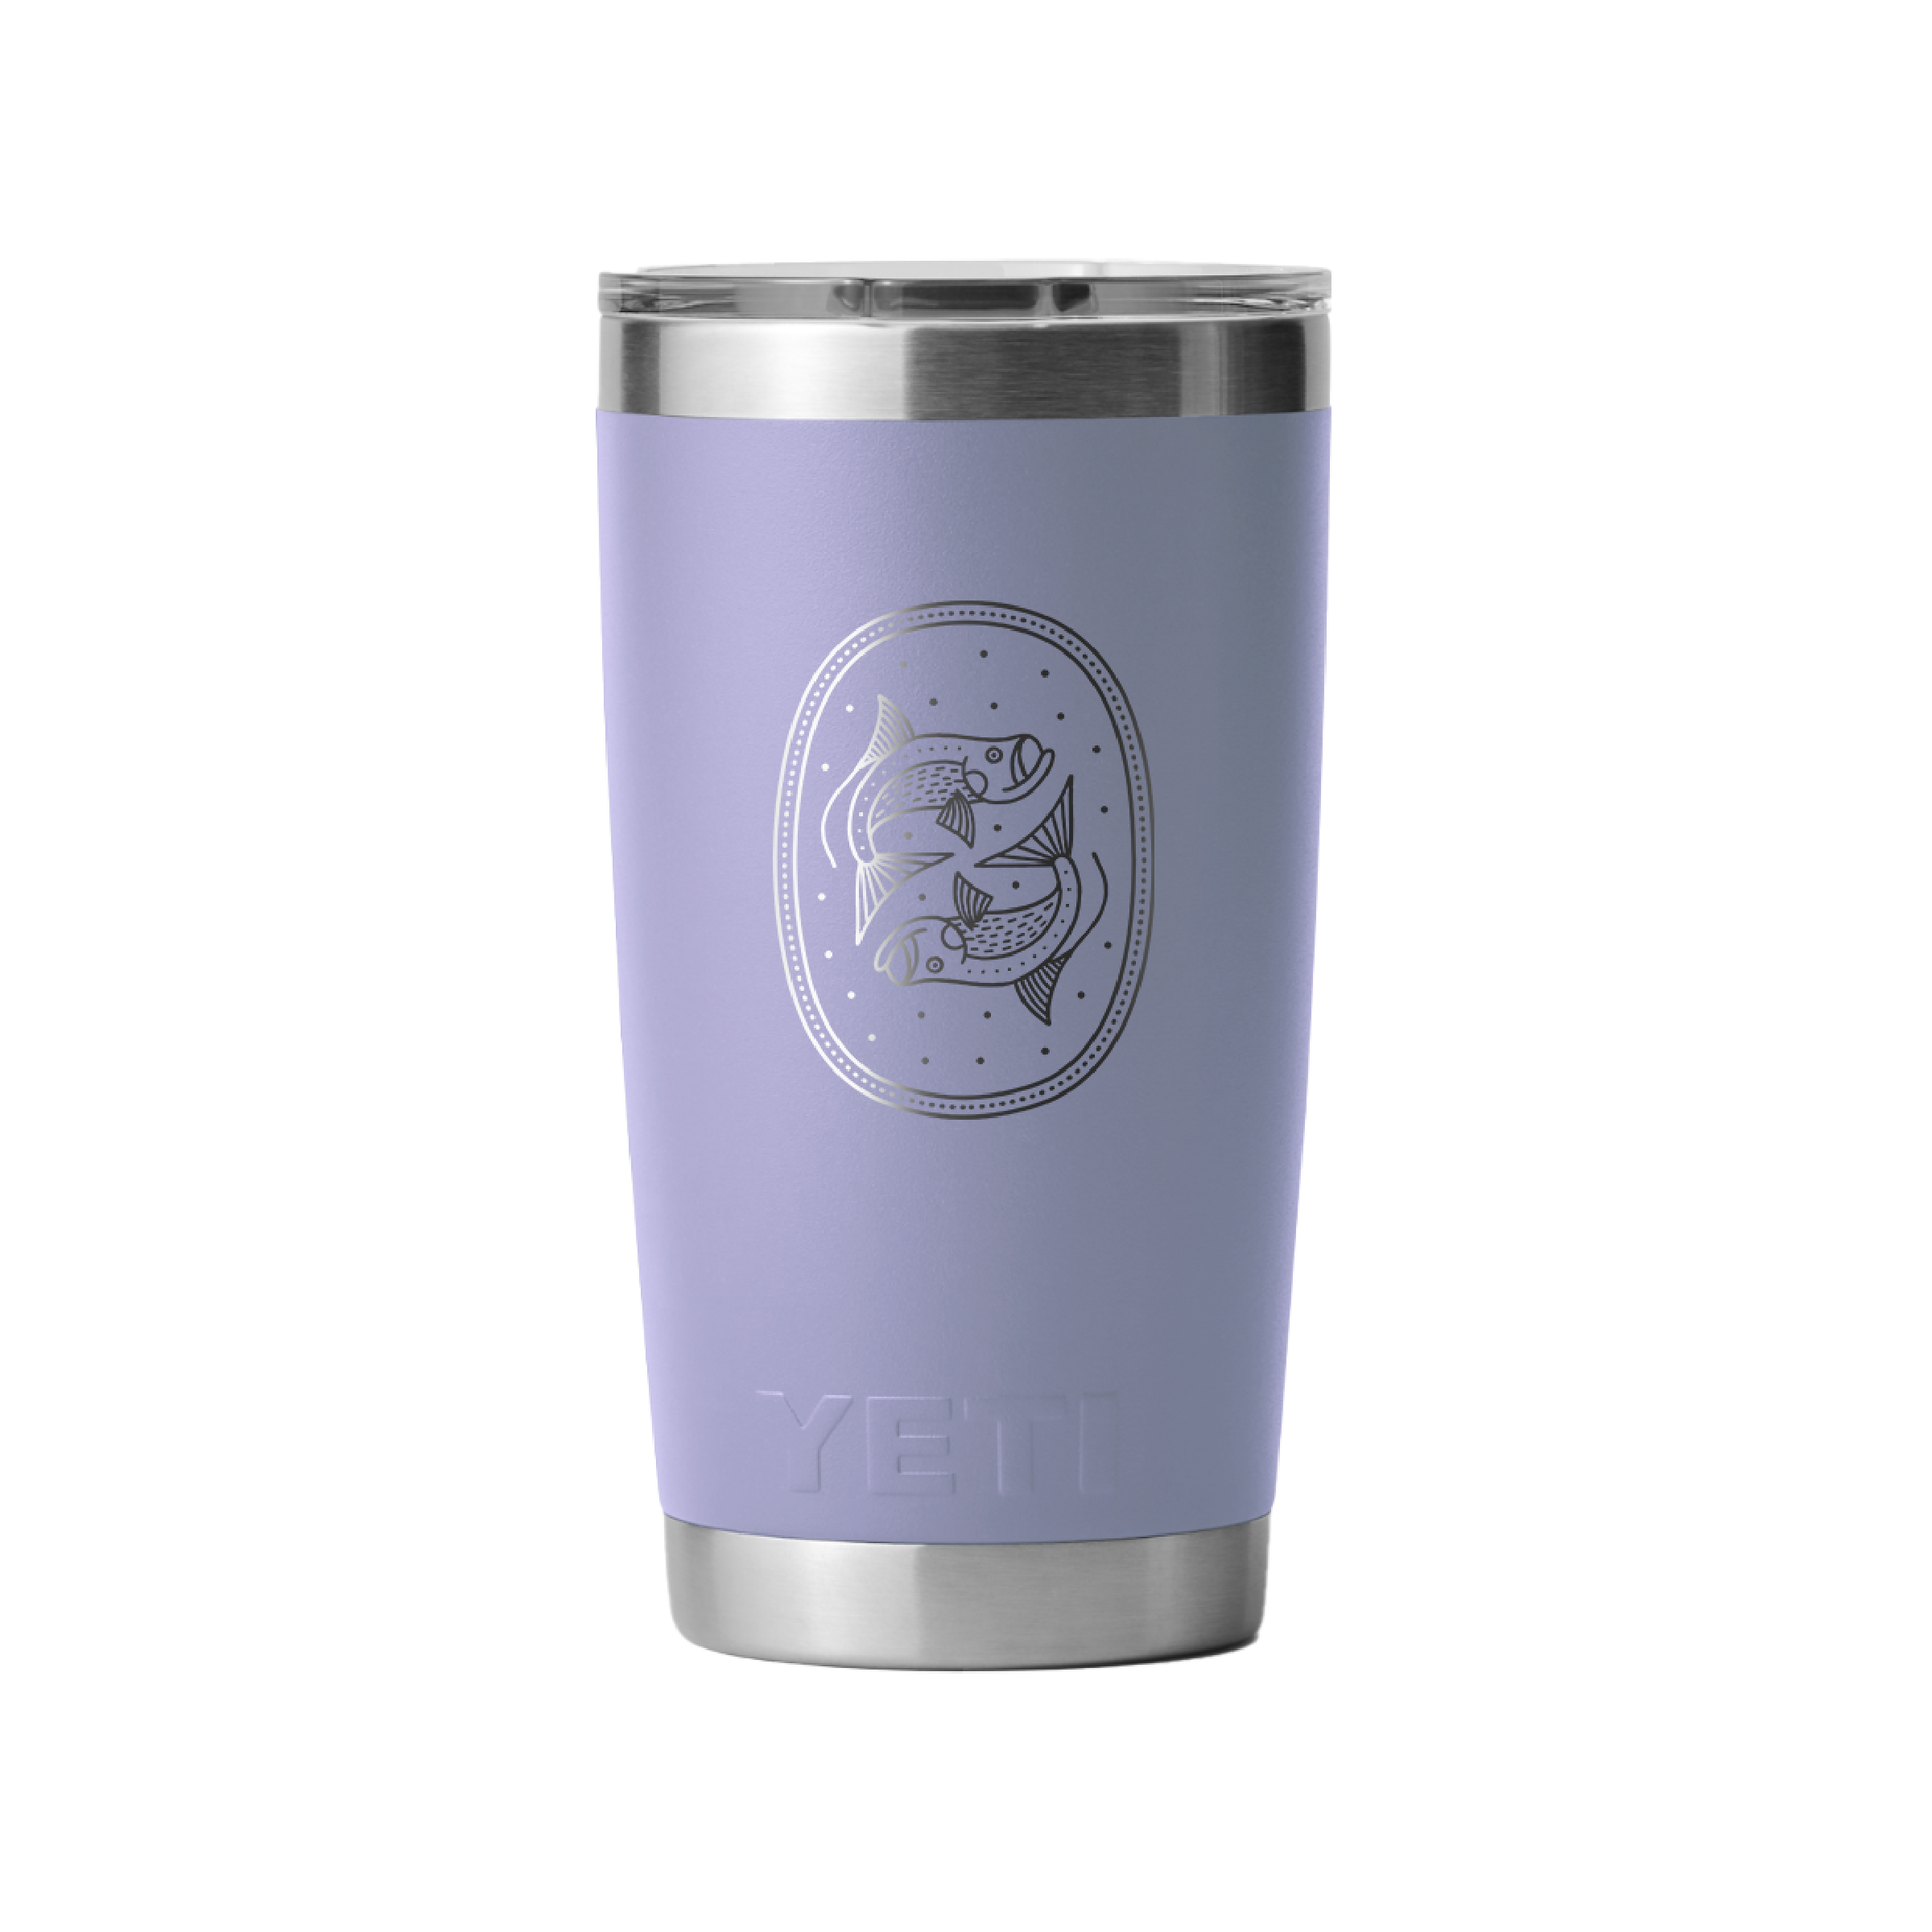 YETI - Supply Your Own - Customized Your Way with a Logo, Monogram